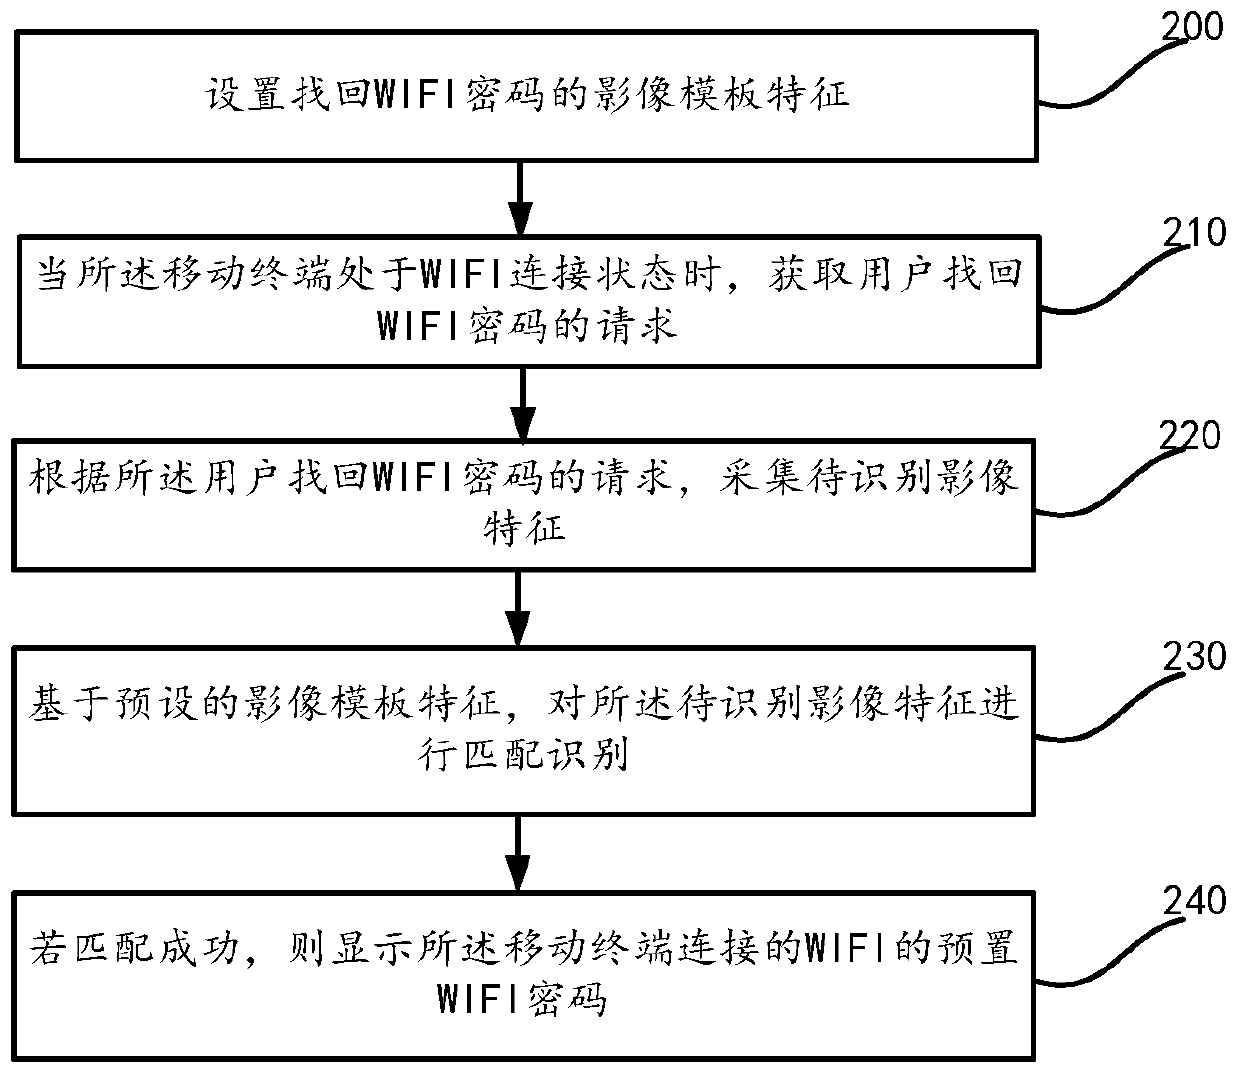 A method and mobile terminal for retrieving wifi password based on feature recognition